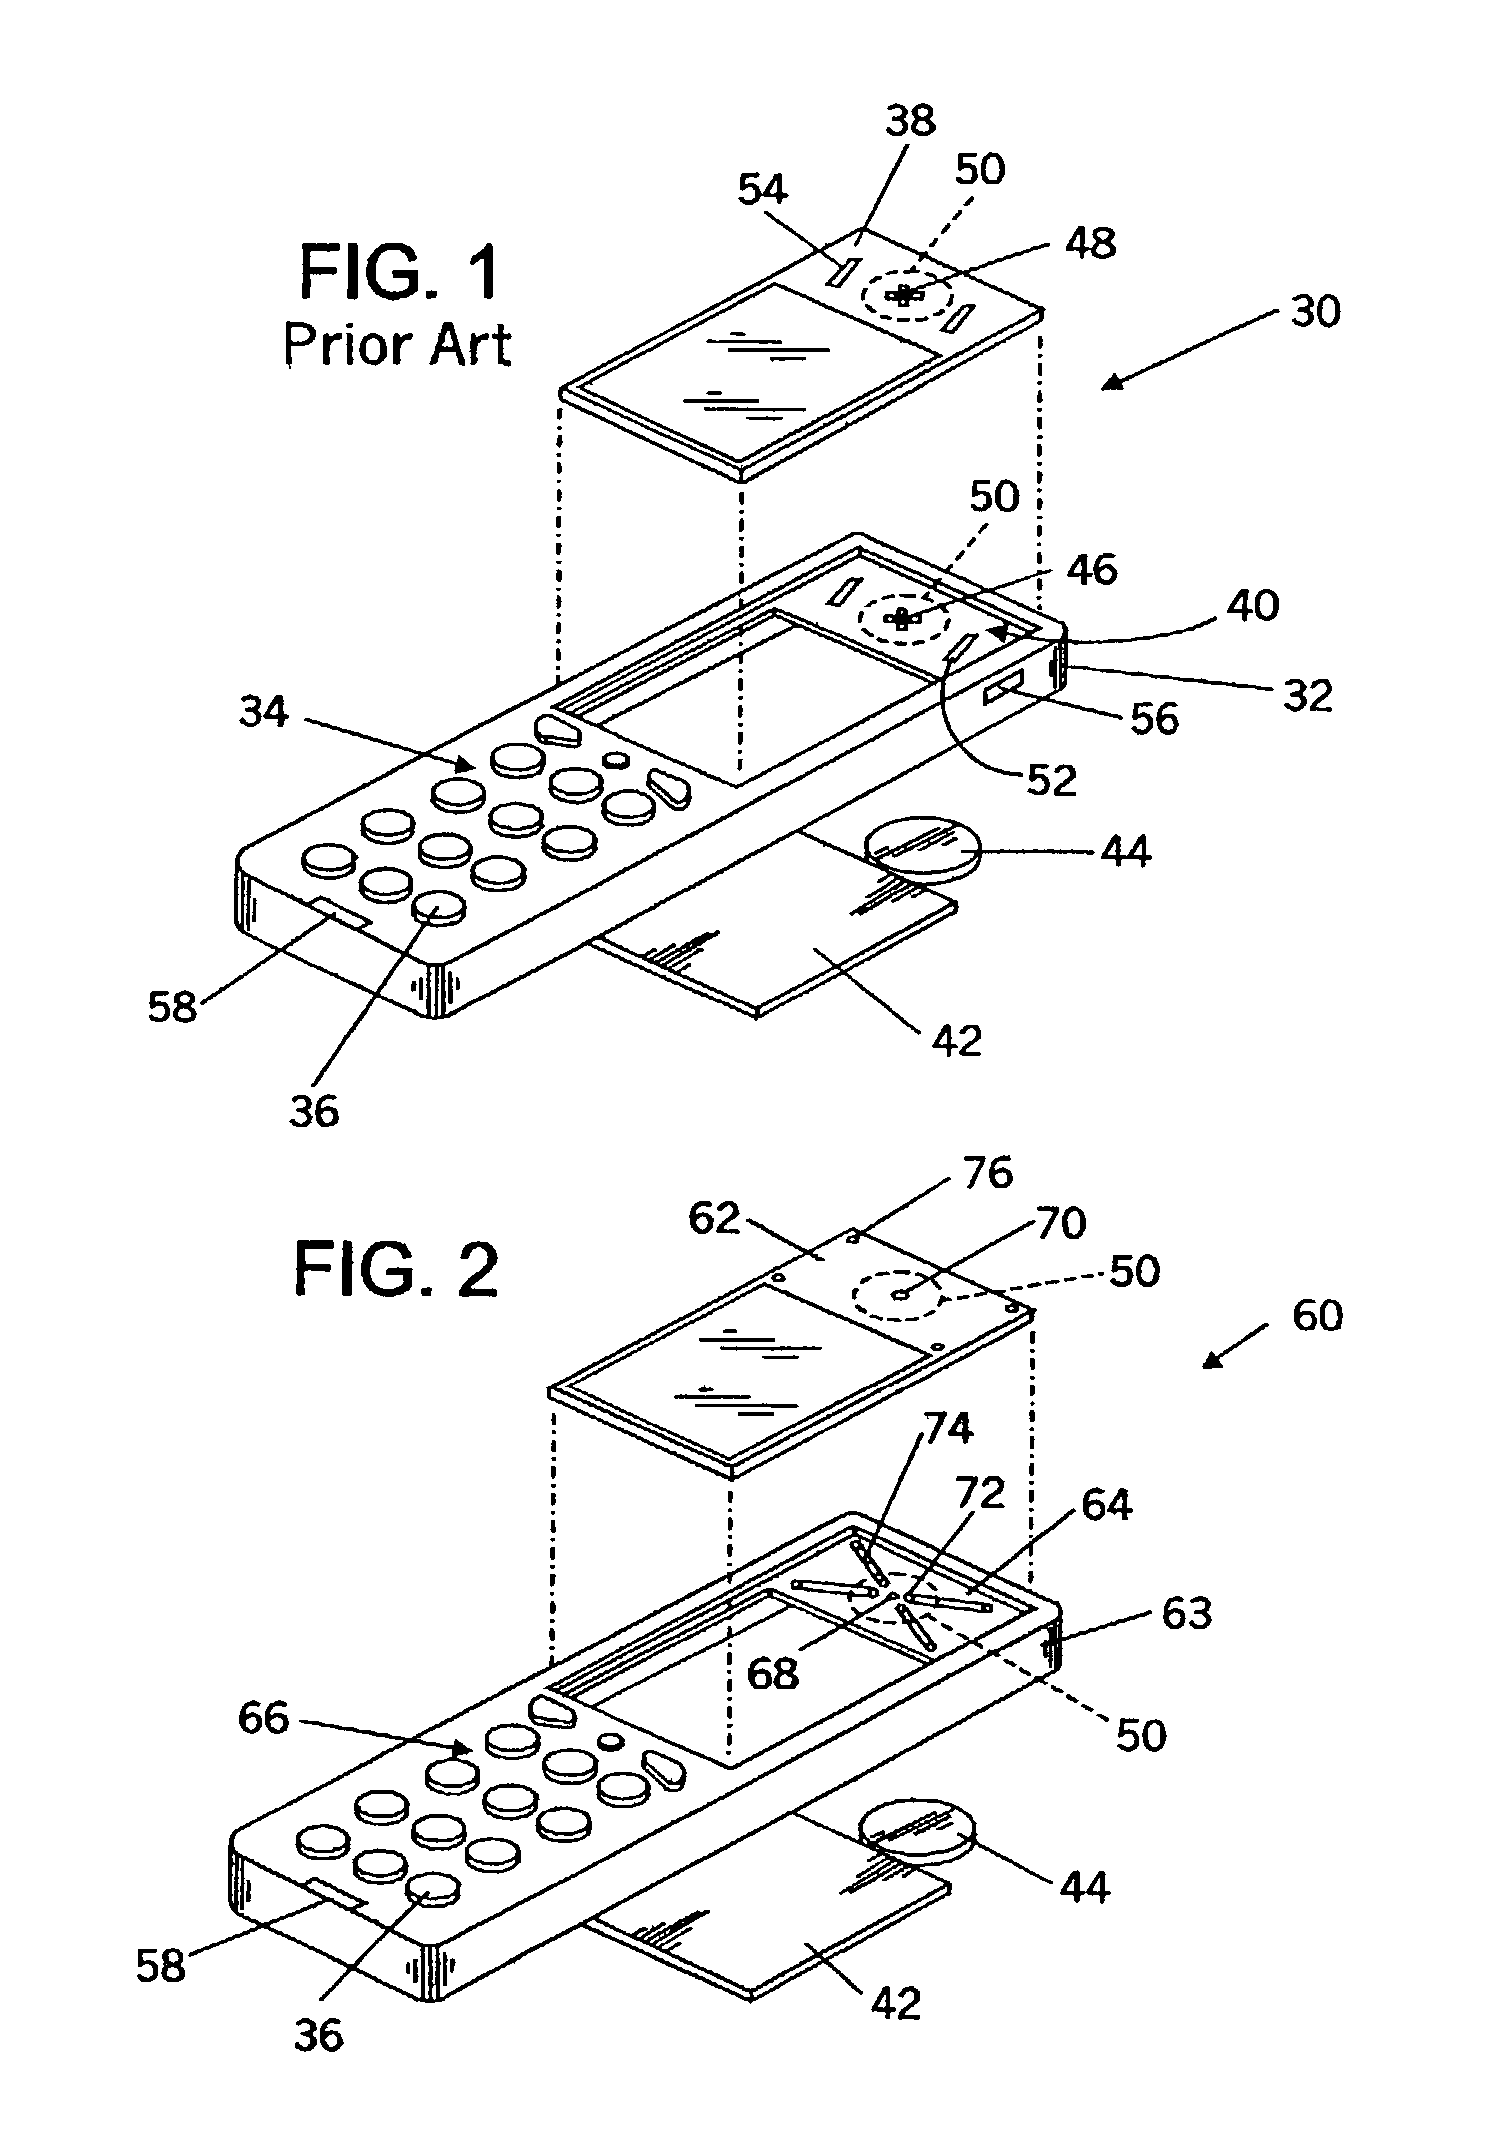 Wireless terminal providing sound pressure level dissipation through channeled porting of sound